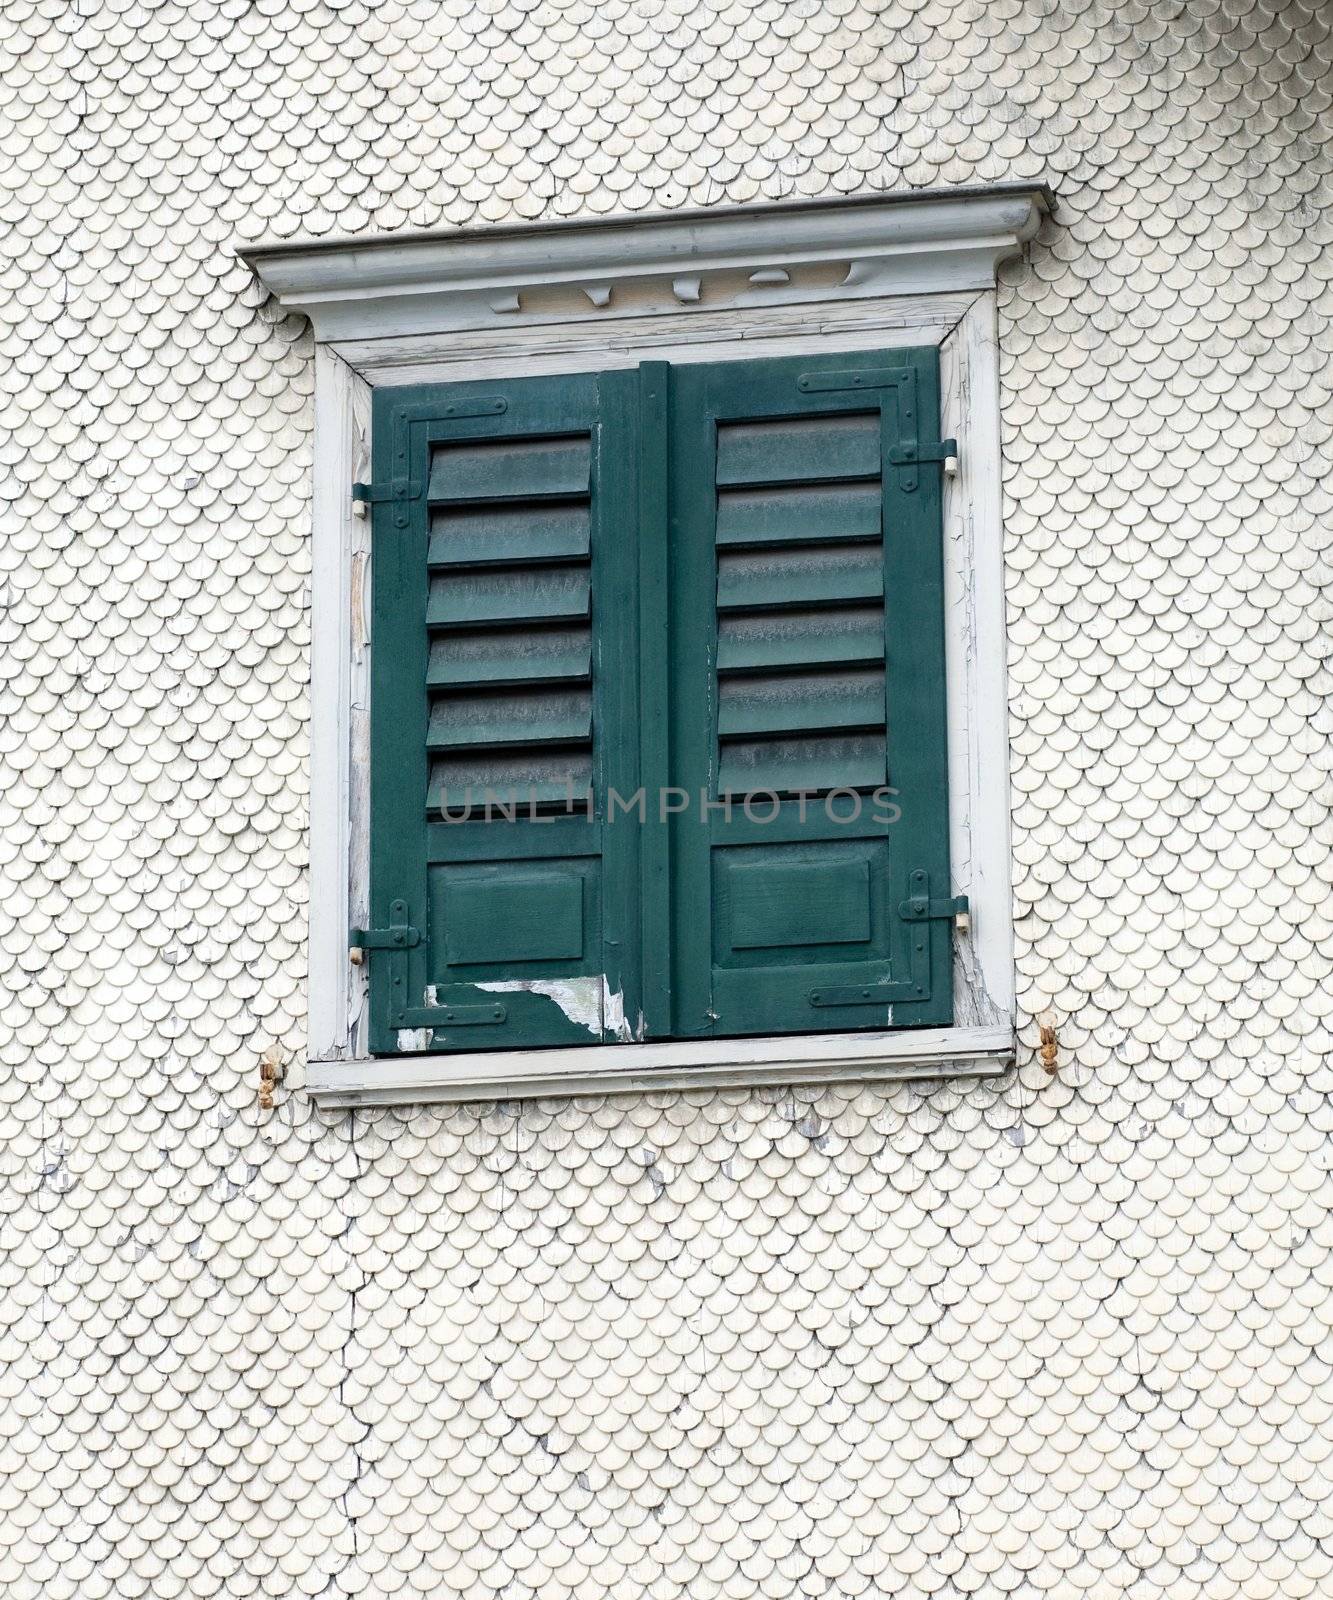 An image of a shut window and white wall